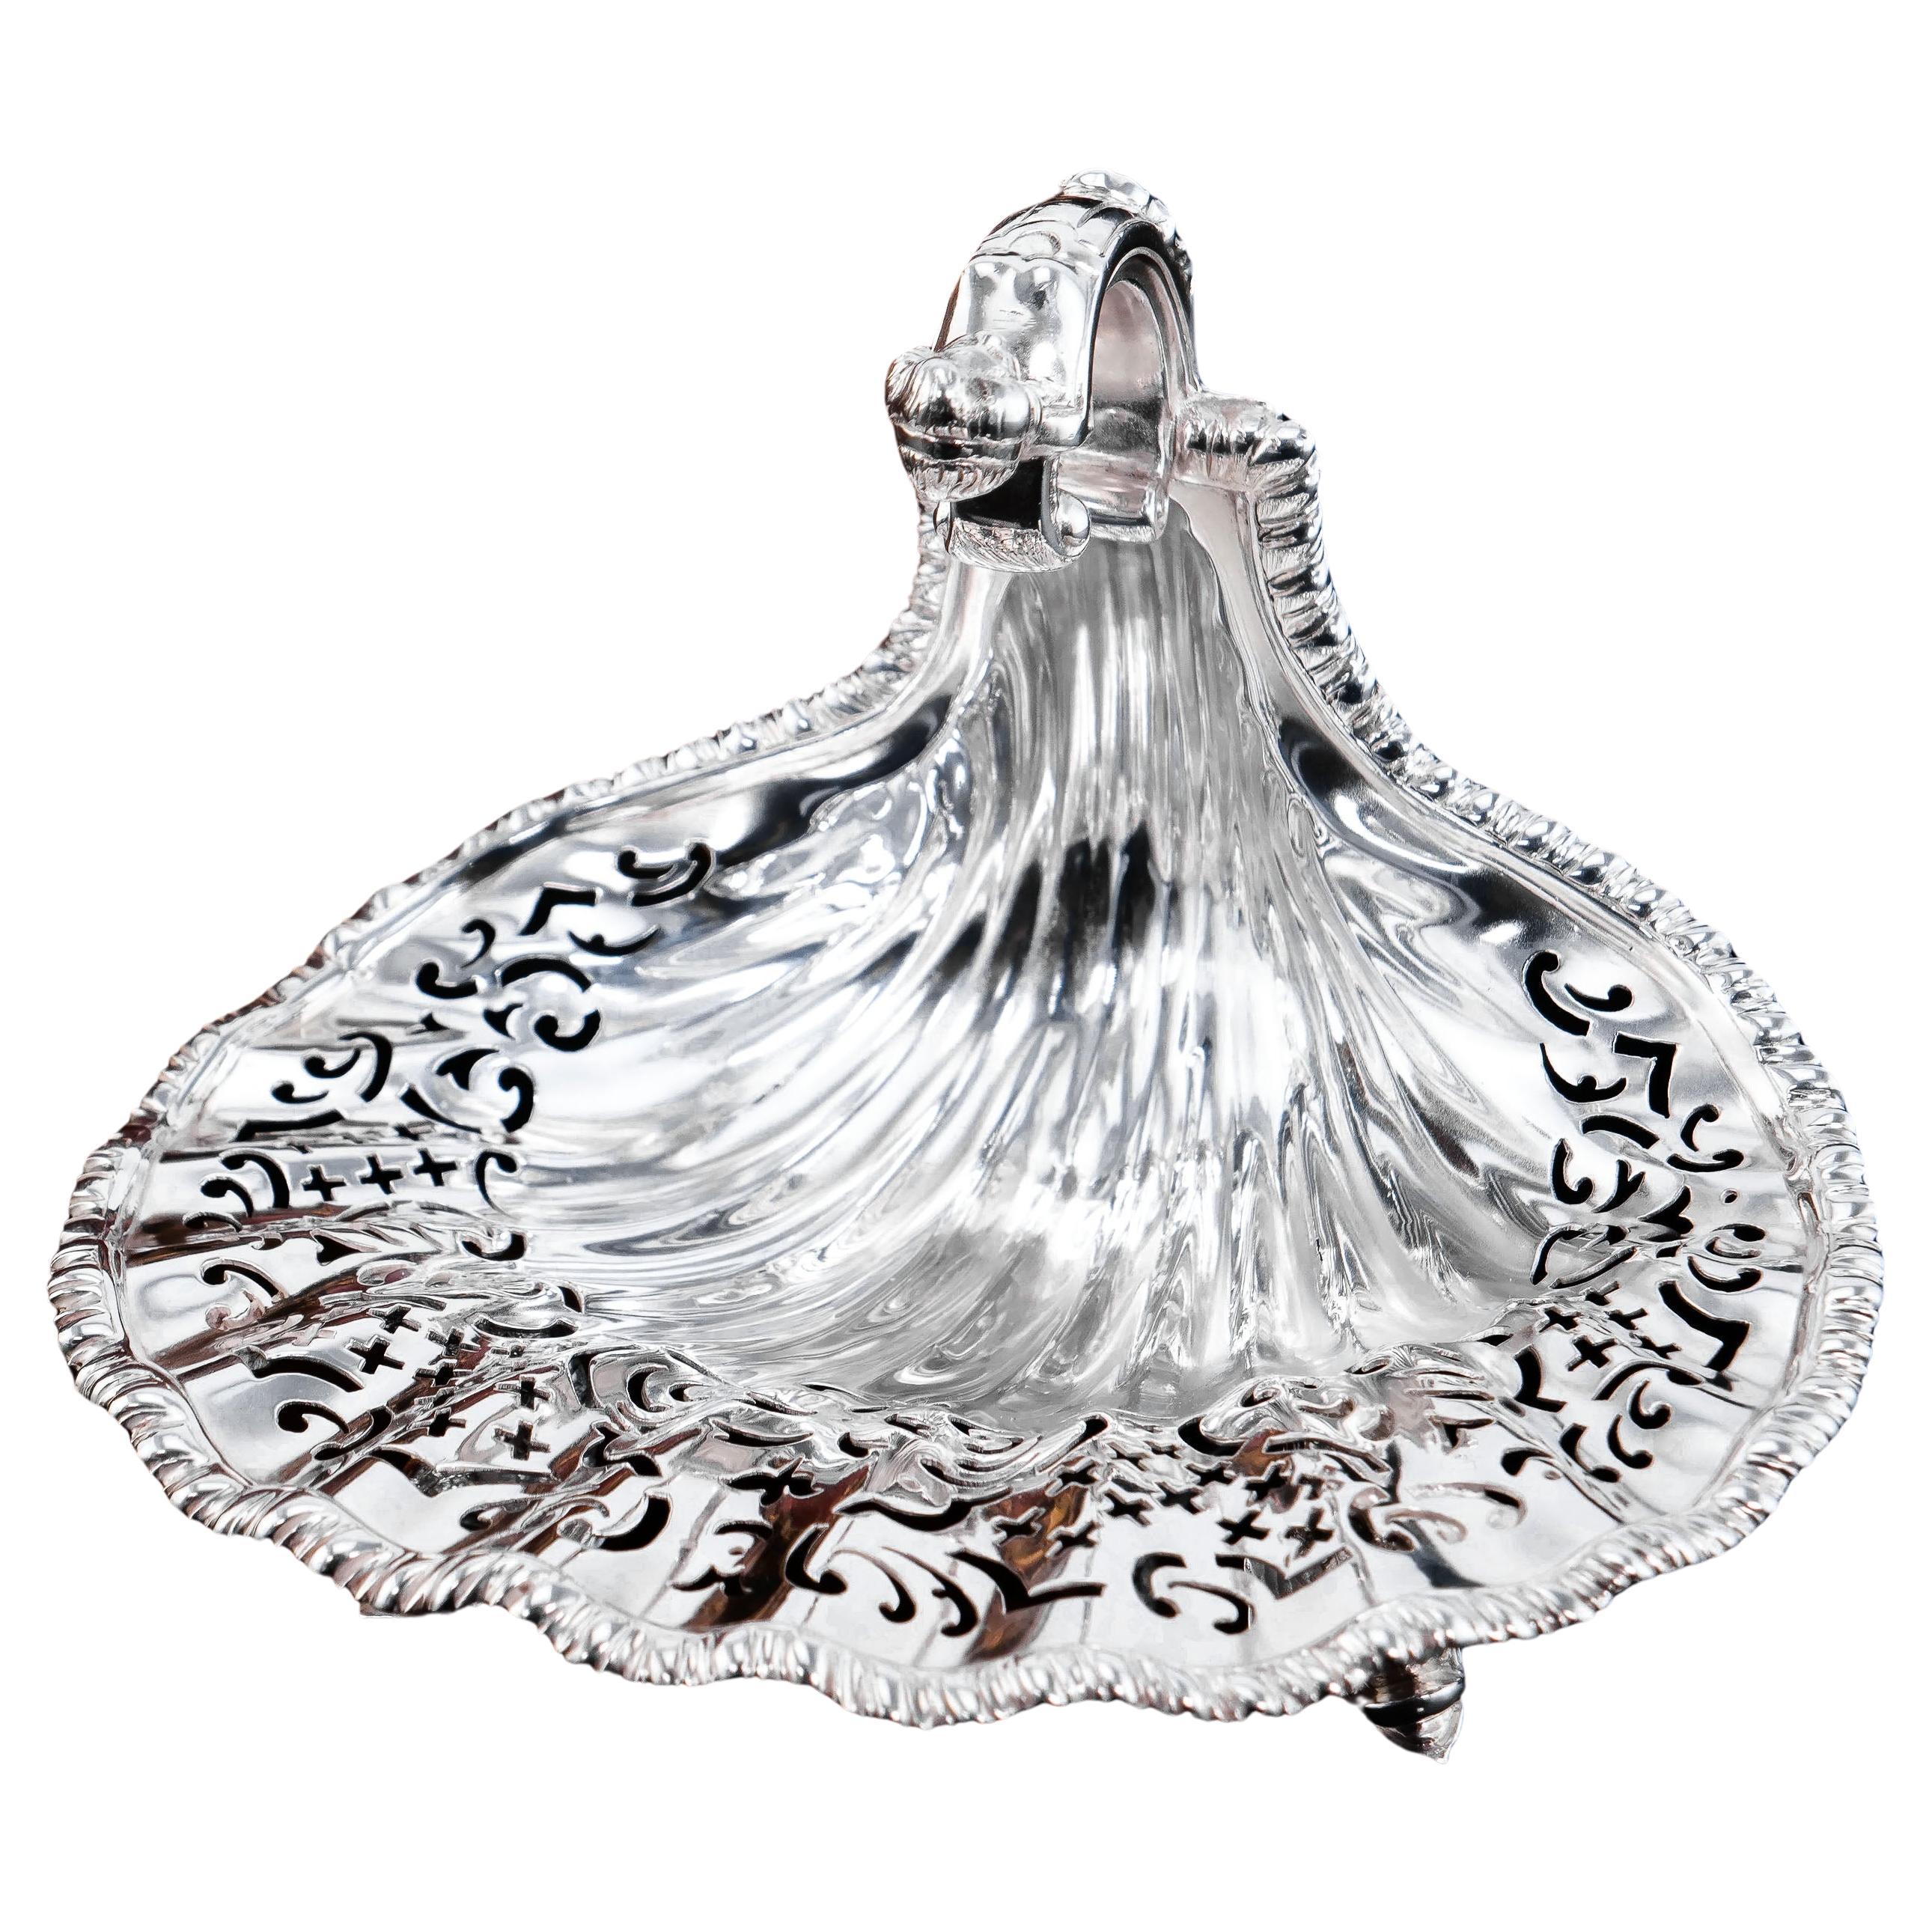 Antique SterlingSilver Rococo Shell Dish in the Manner of Paul de Lamerie - 1908 For Sale